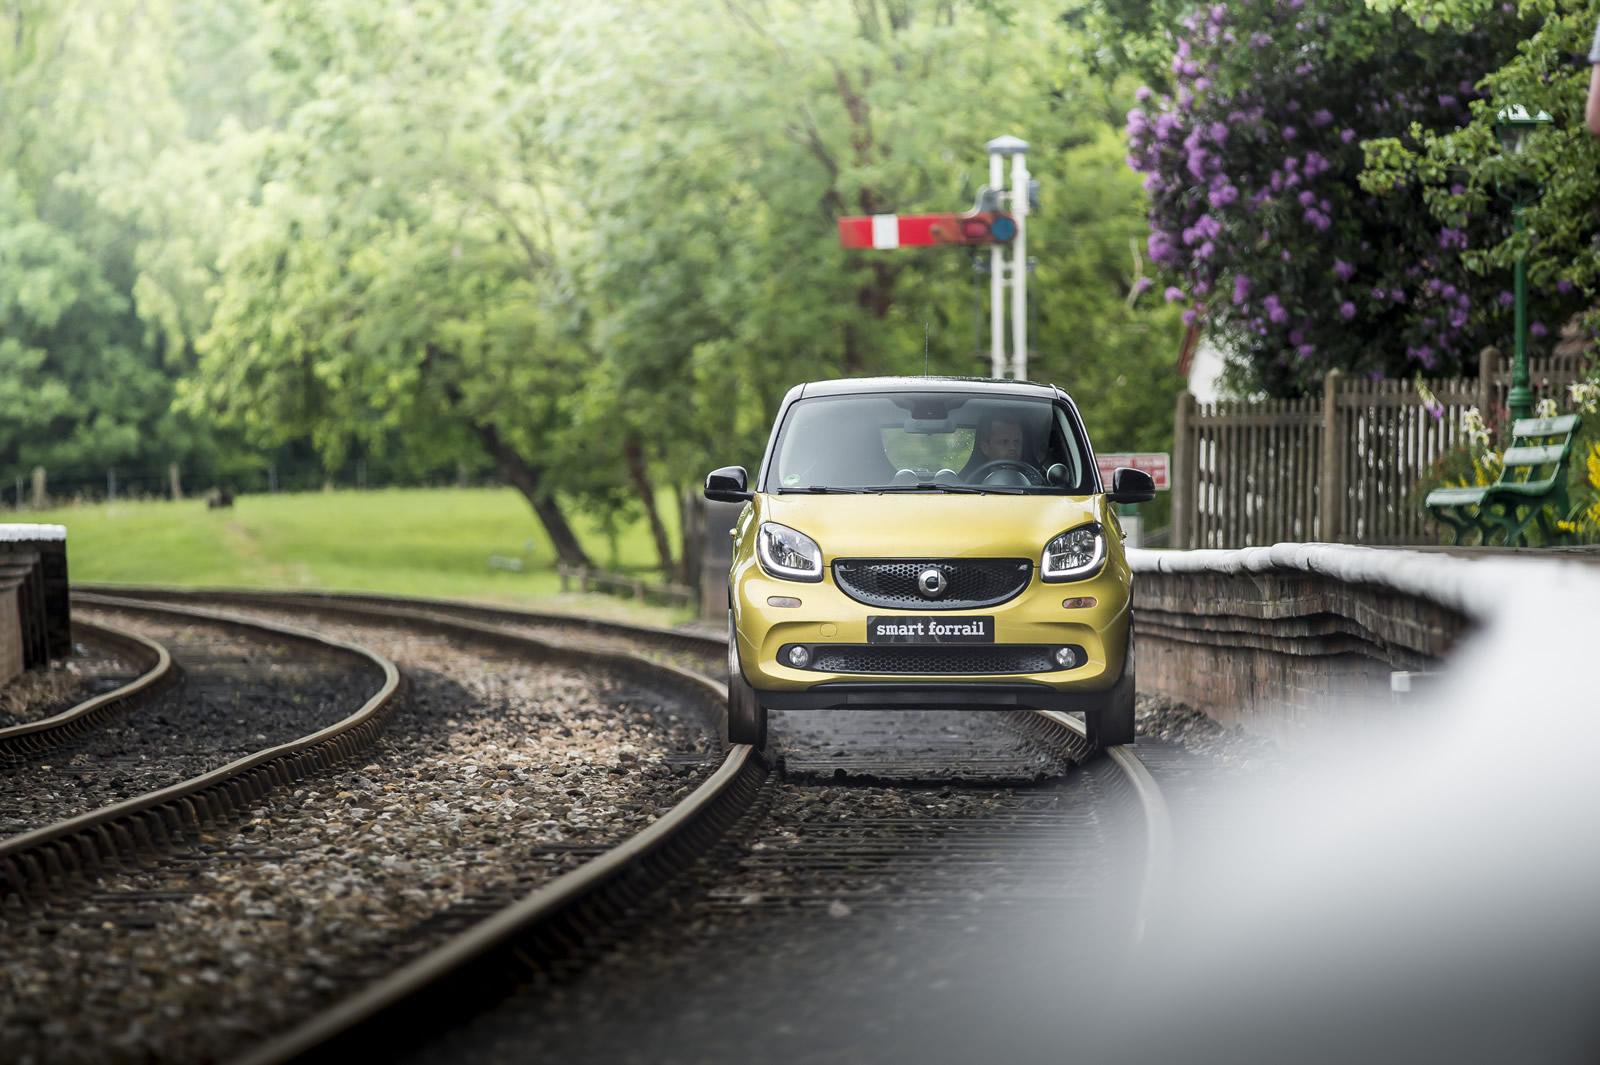 Smart forfour (forrail)